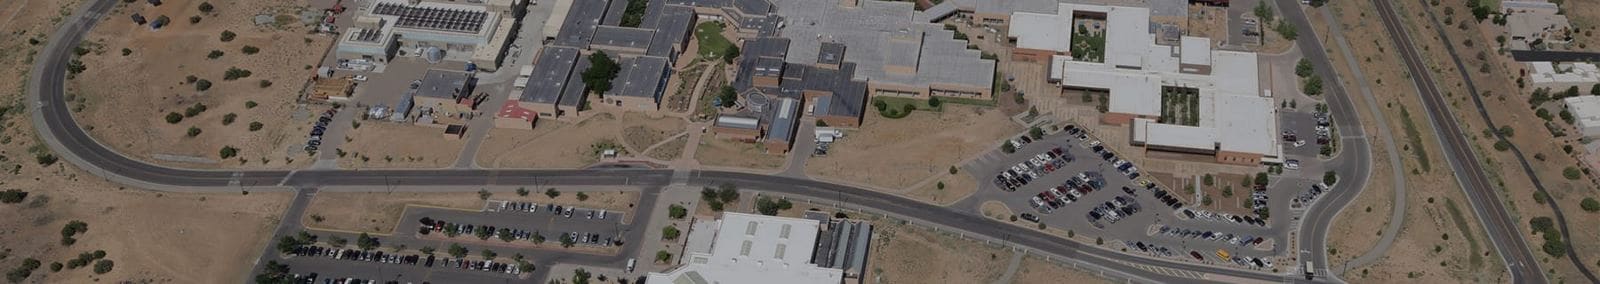 Aerial view of Santa Fe Community College with new GAF roof coatings